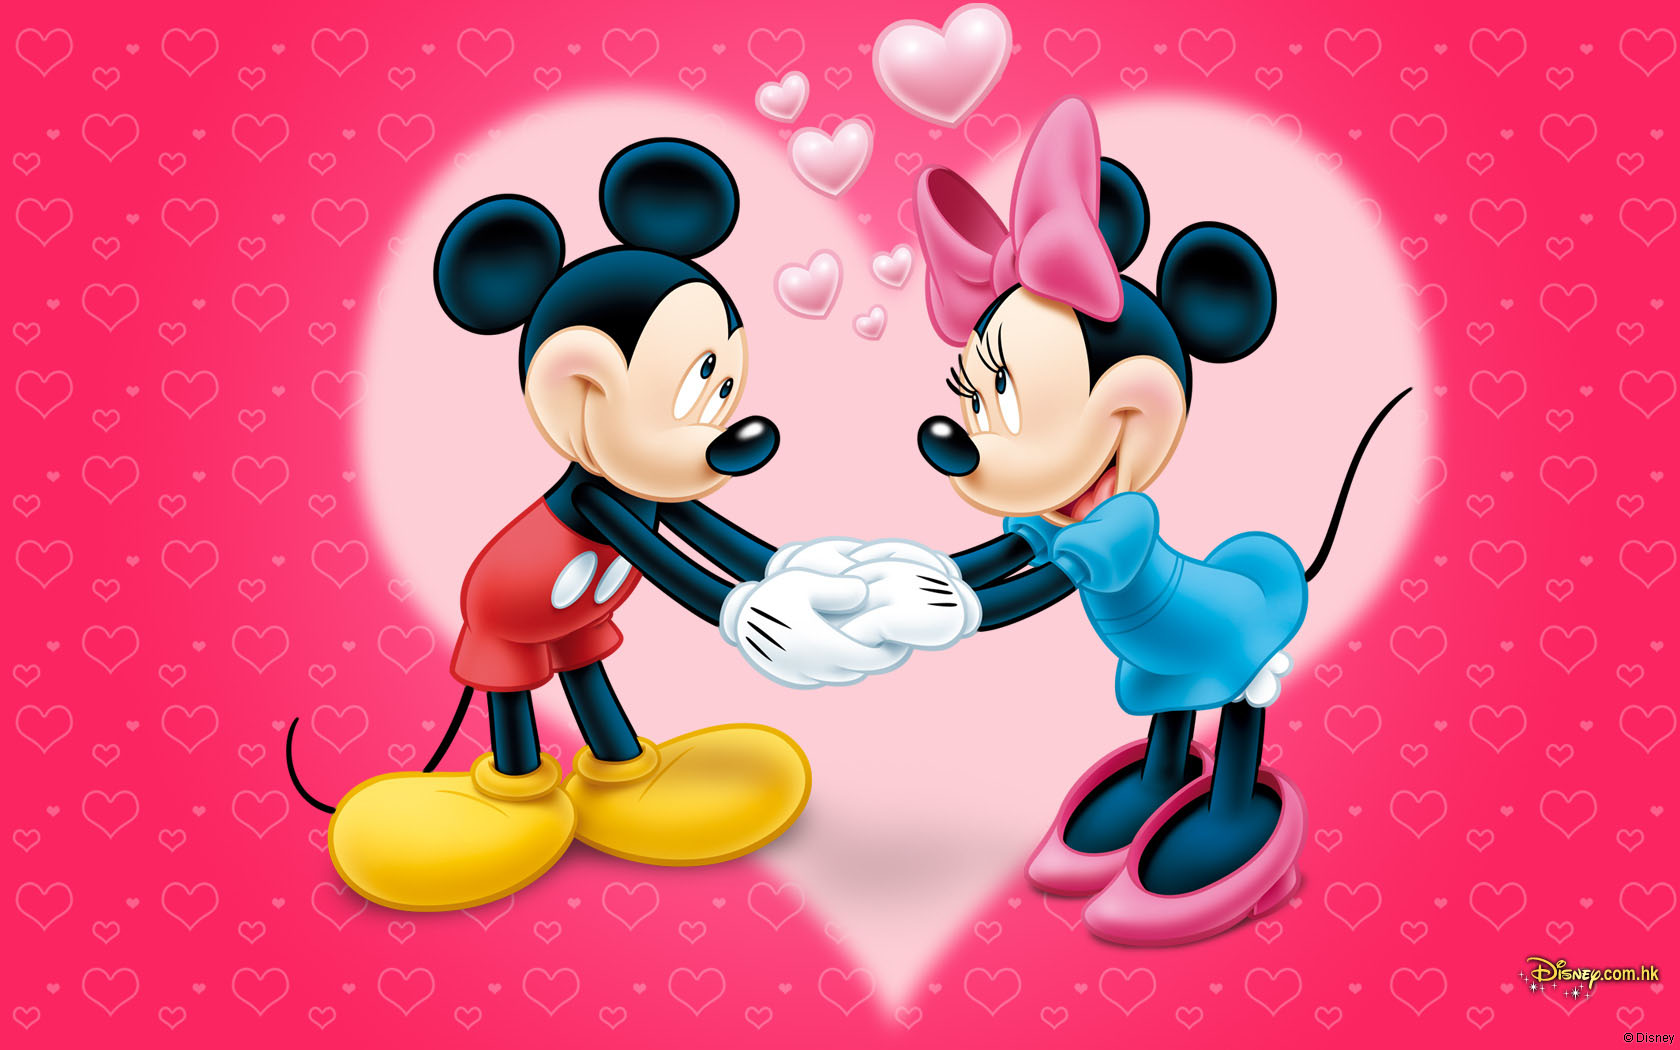 Mickey Mouse Image Wallpaper for Phone - Cartoons Wallpapers